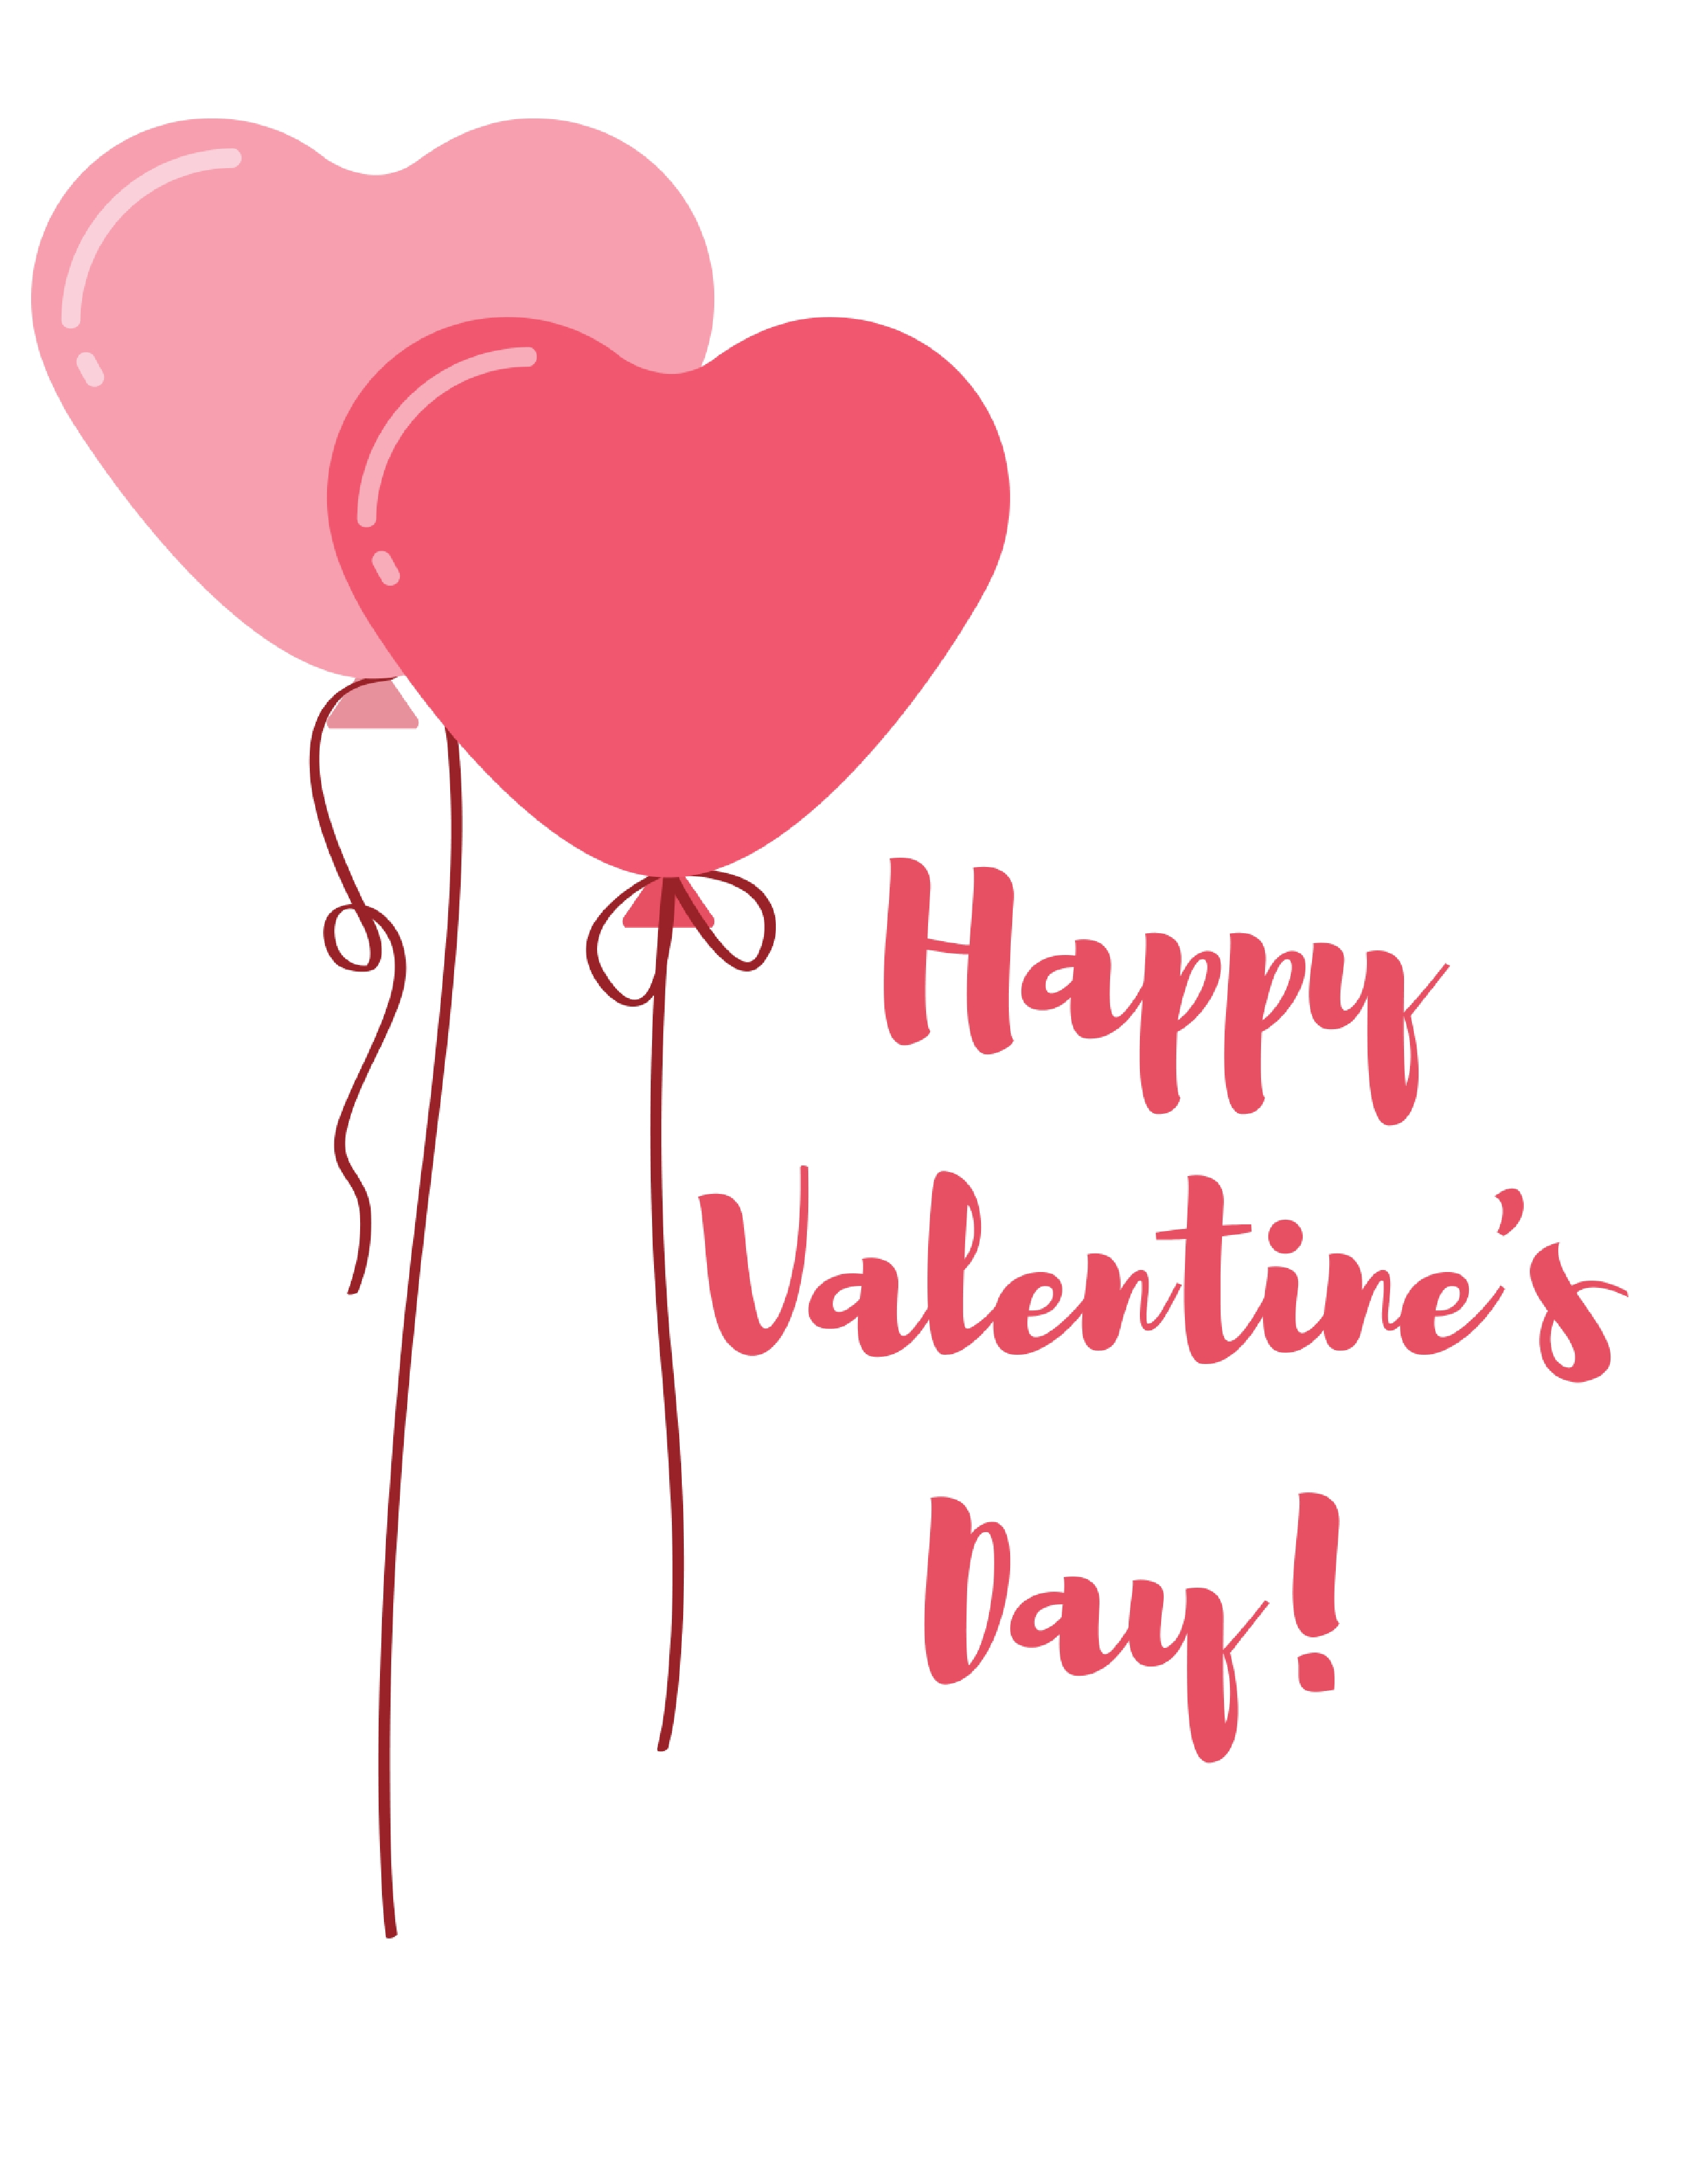 5 FREE Valentine s Day Printables The Little Frugal House